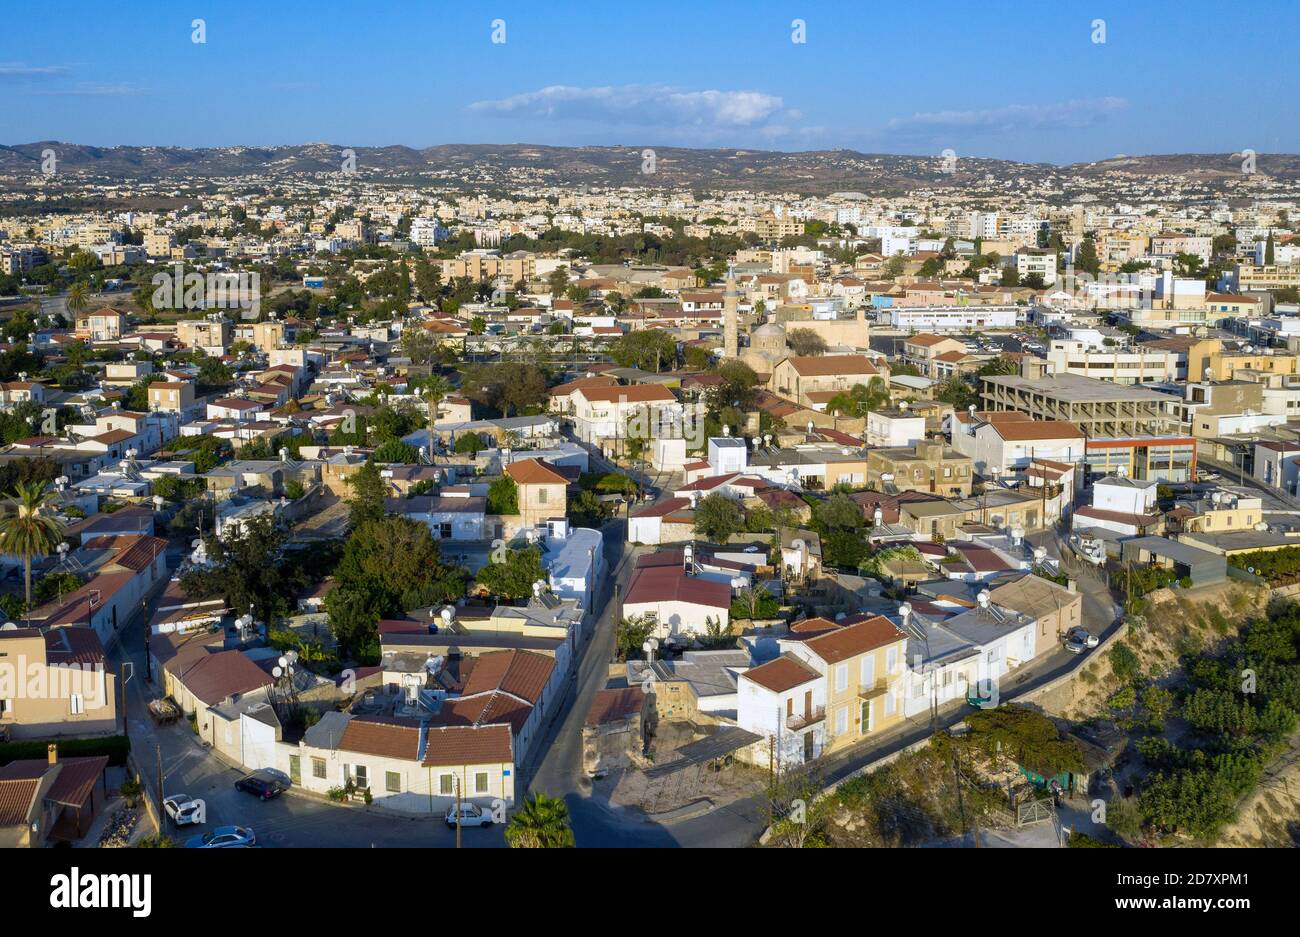 Aerial view of the Mouttalos (Ktima) area of Paphos old town, Paphos, Cyprus. Stock Photo